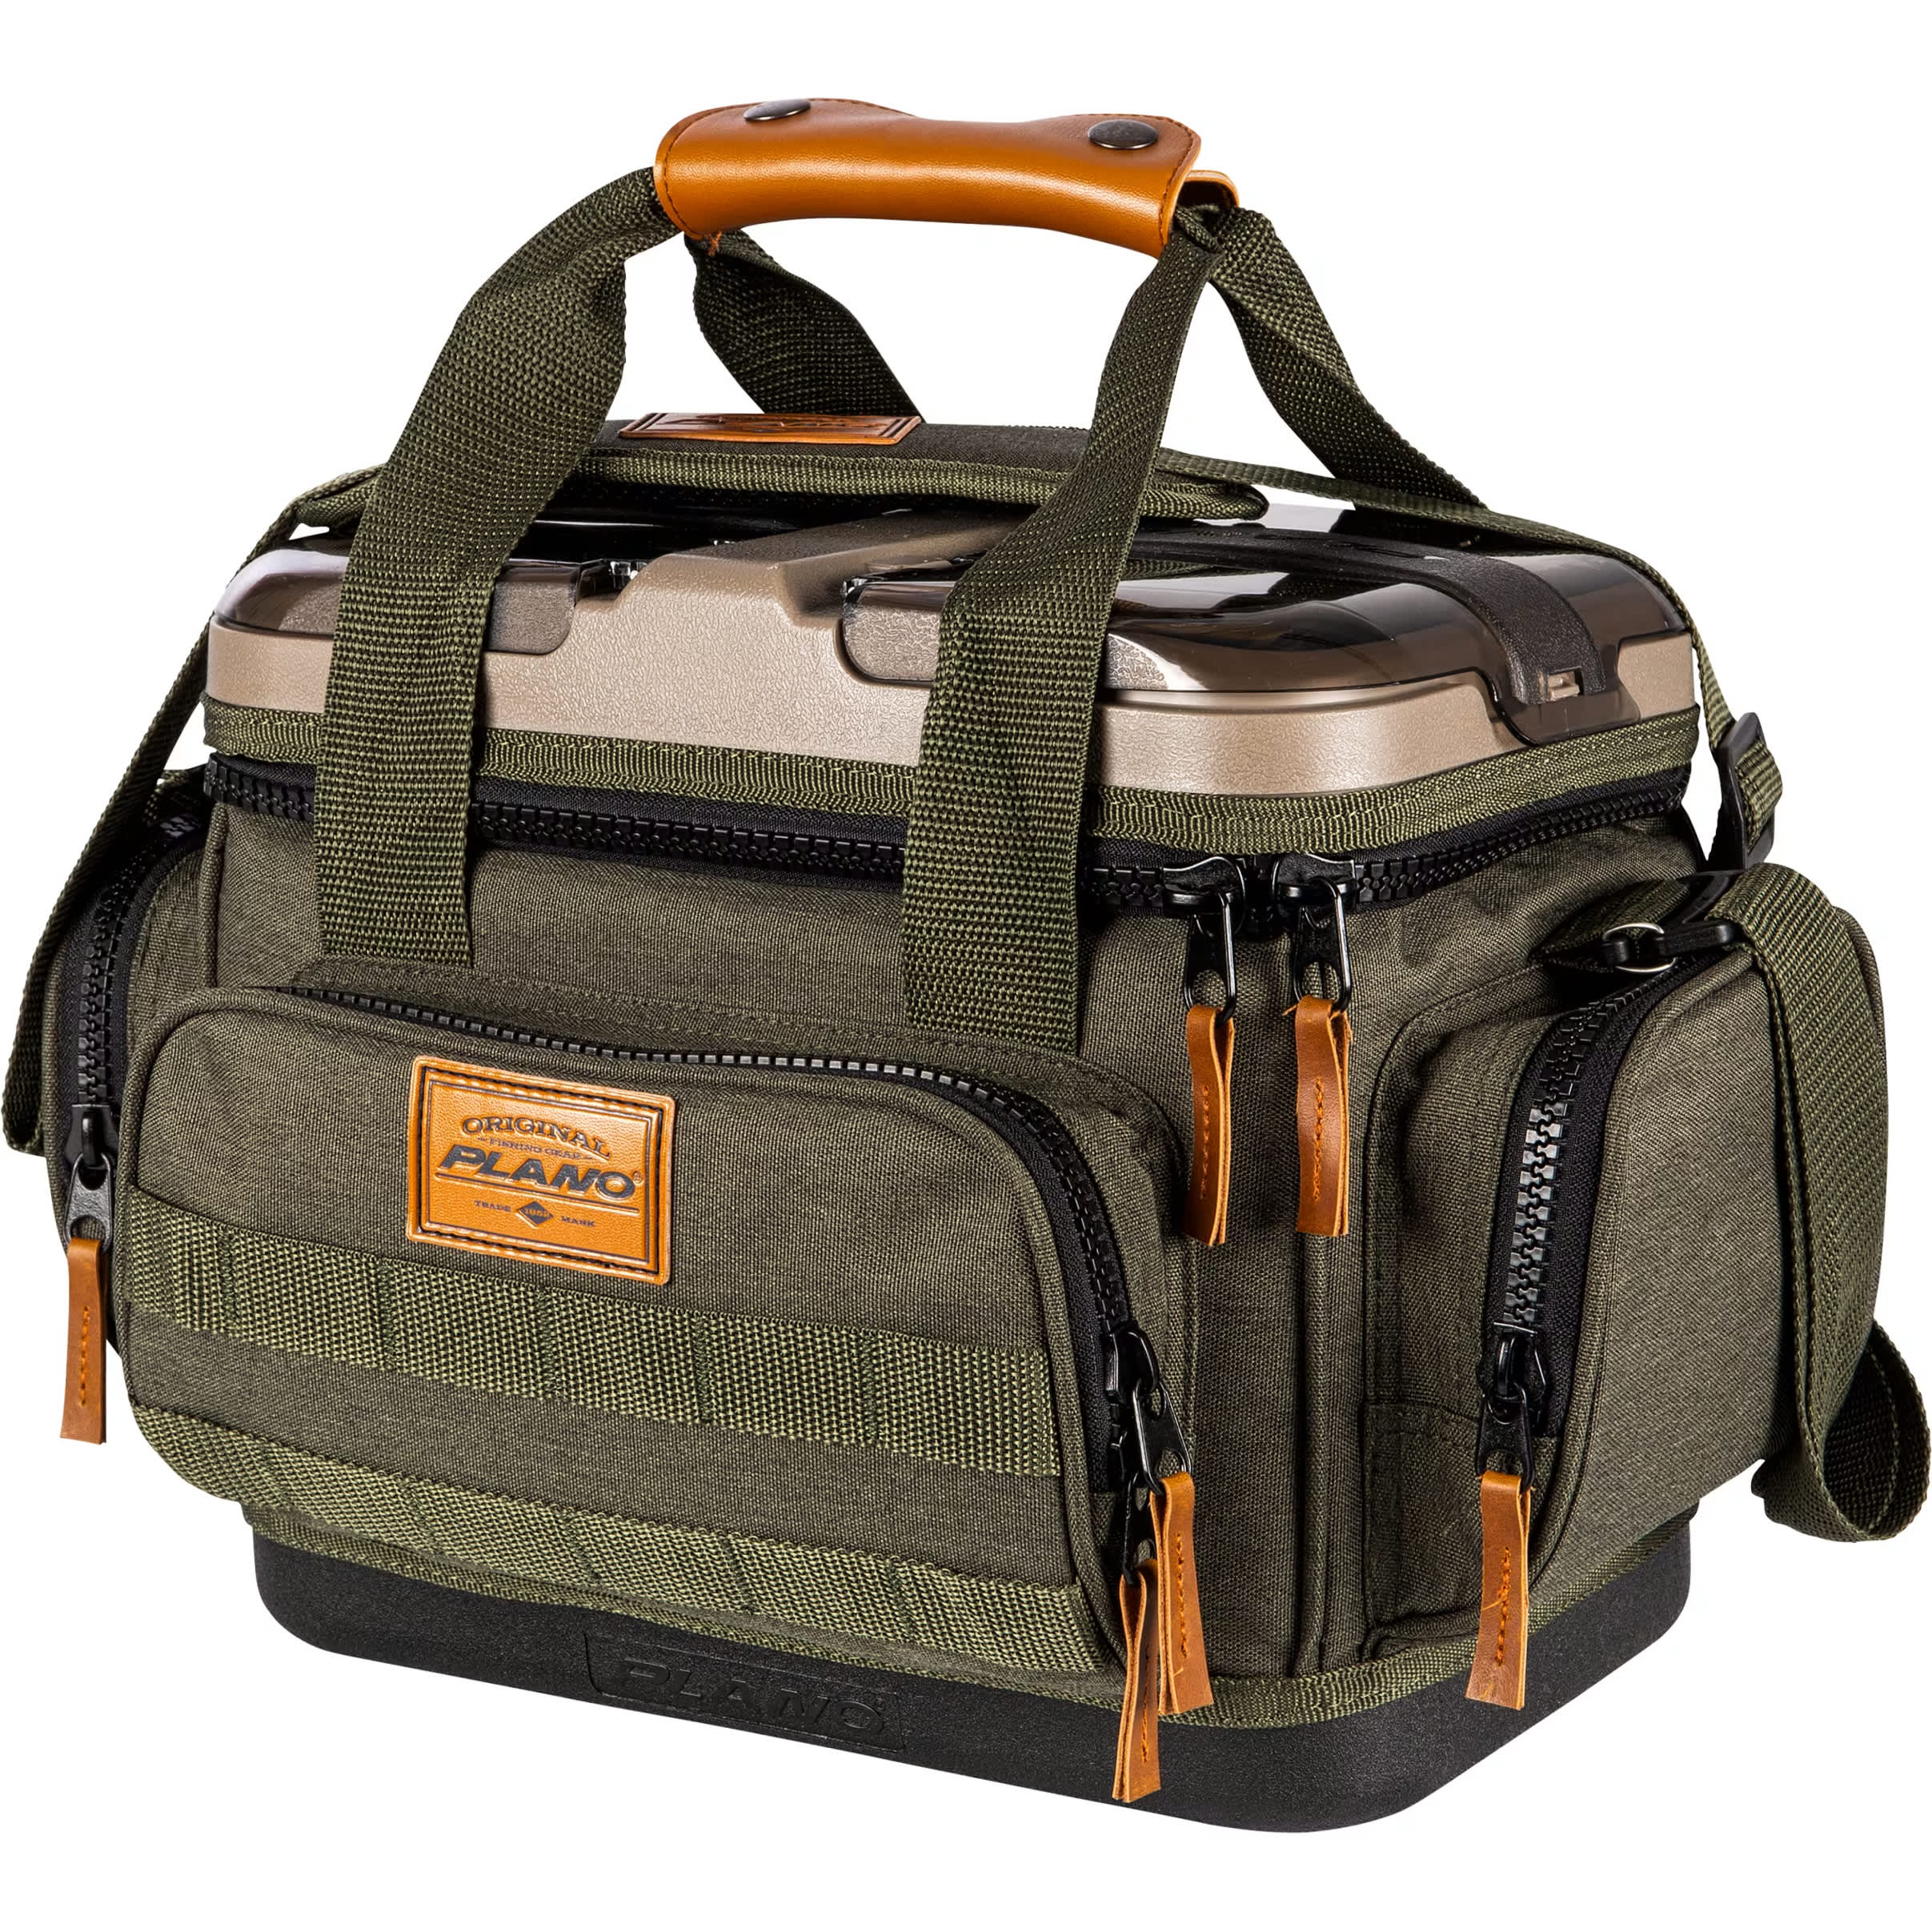 Plano A-Series 2.0 Tackle Bags | Cabela's Canada